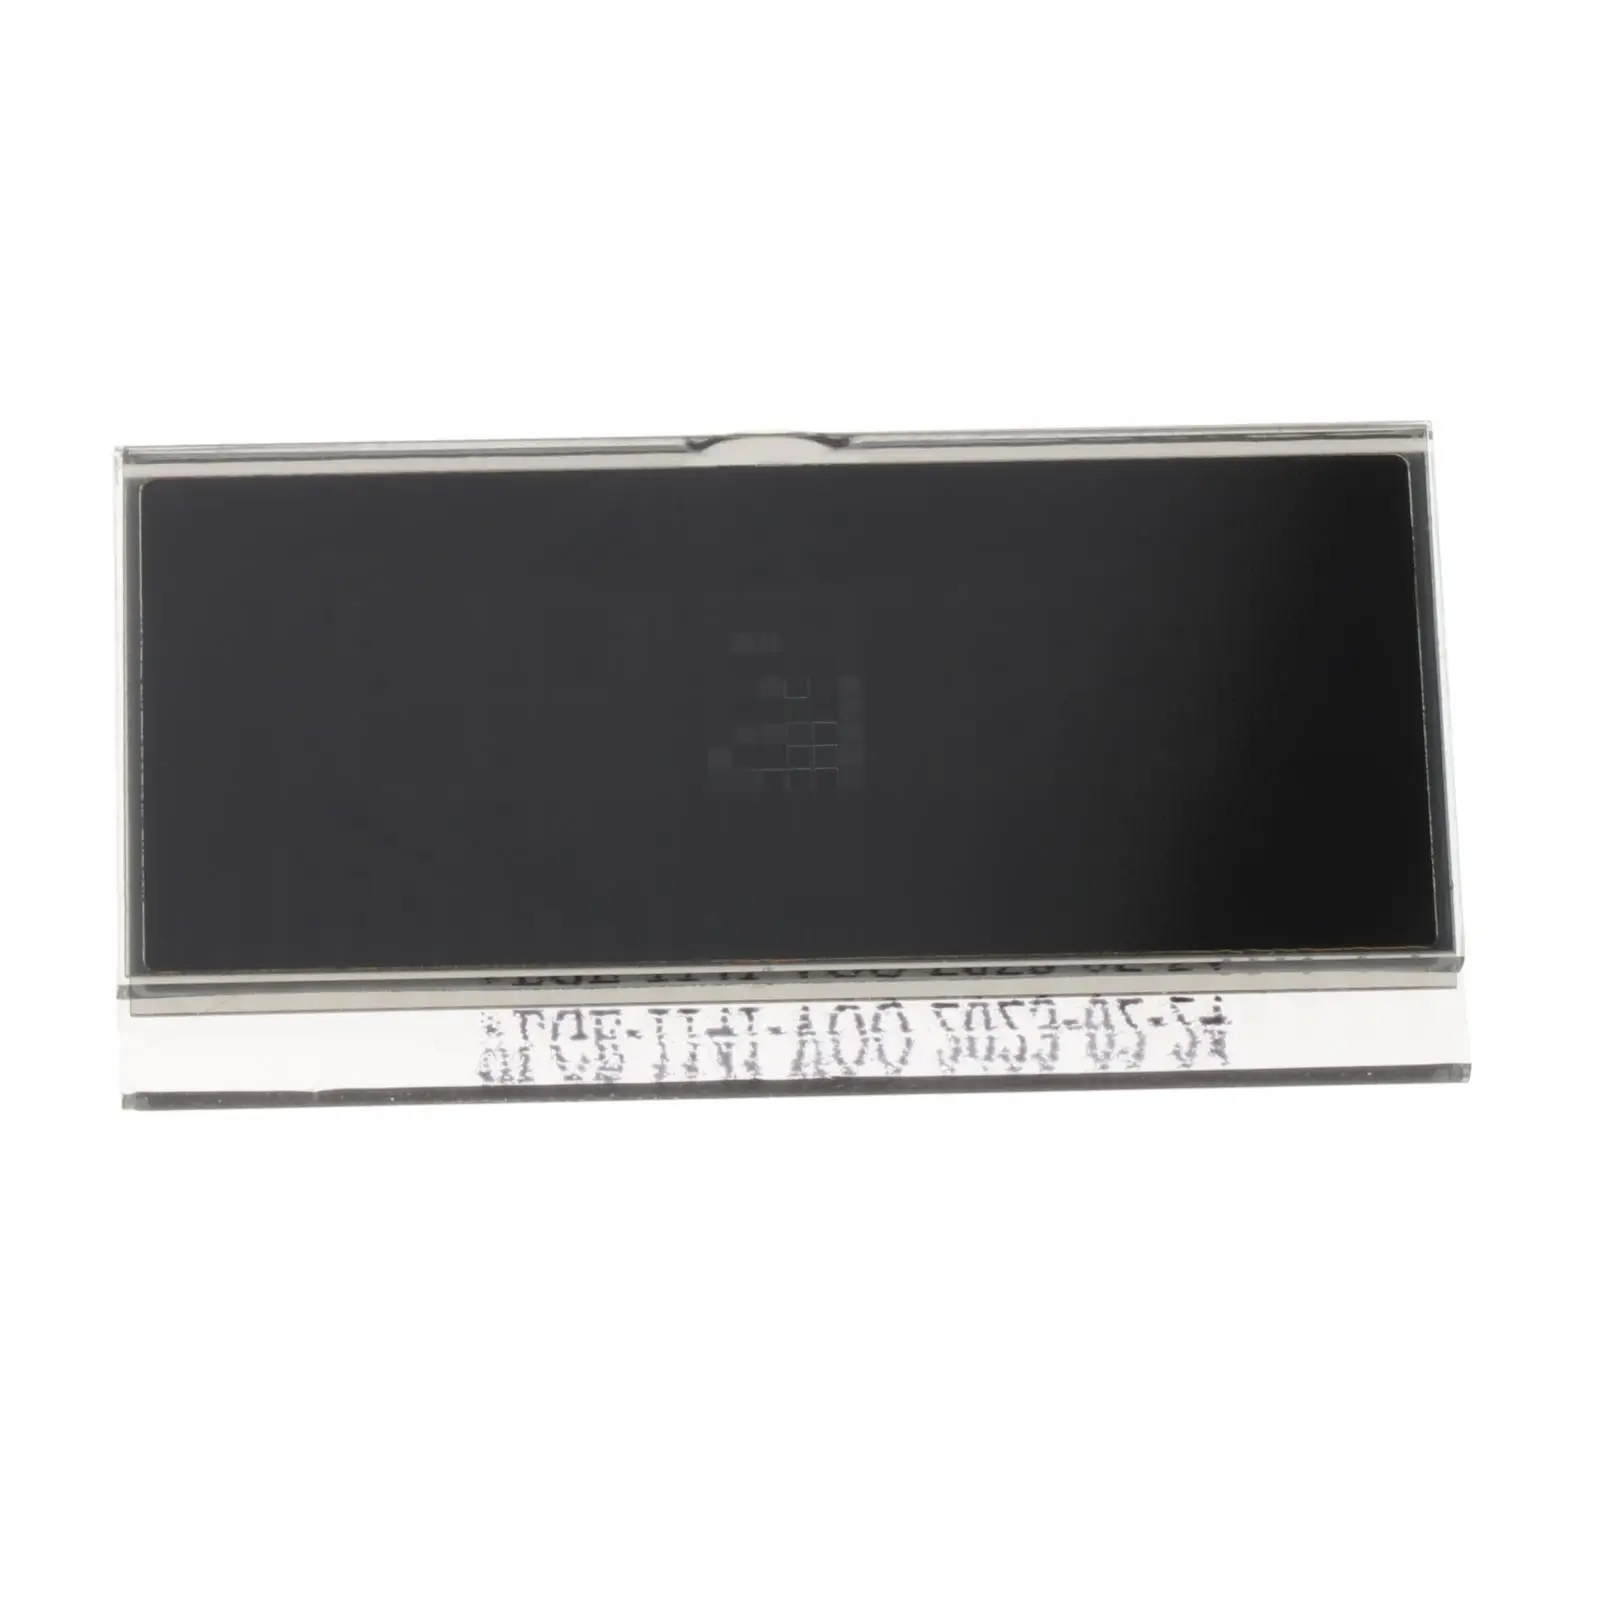 LCD Screen Professional Replace Parts High Performance for Audi A6 4F Q7 4L